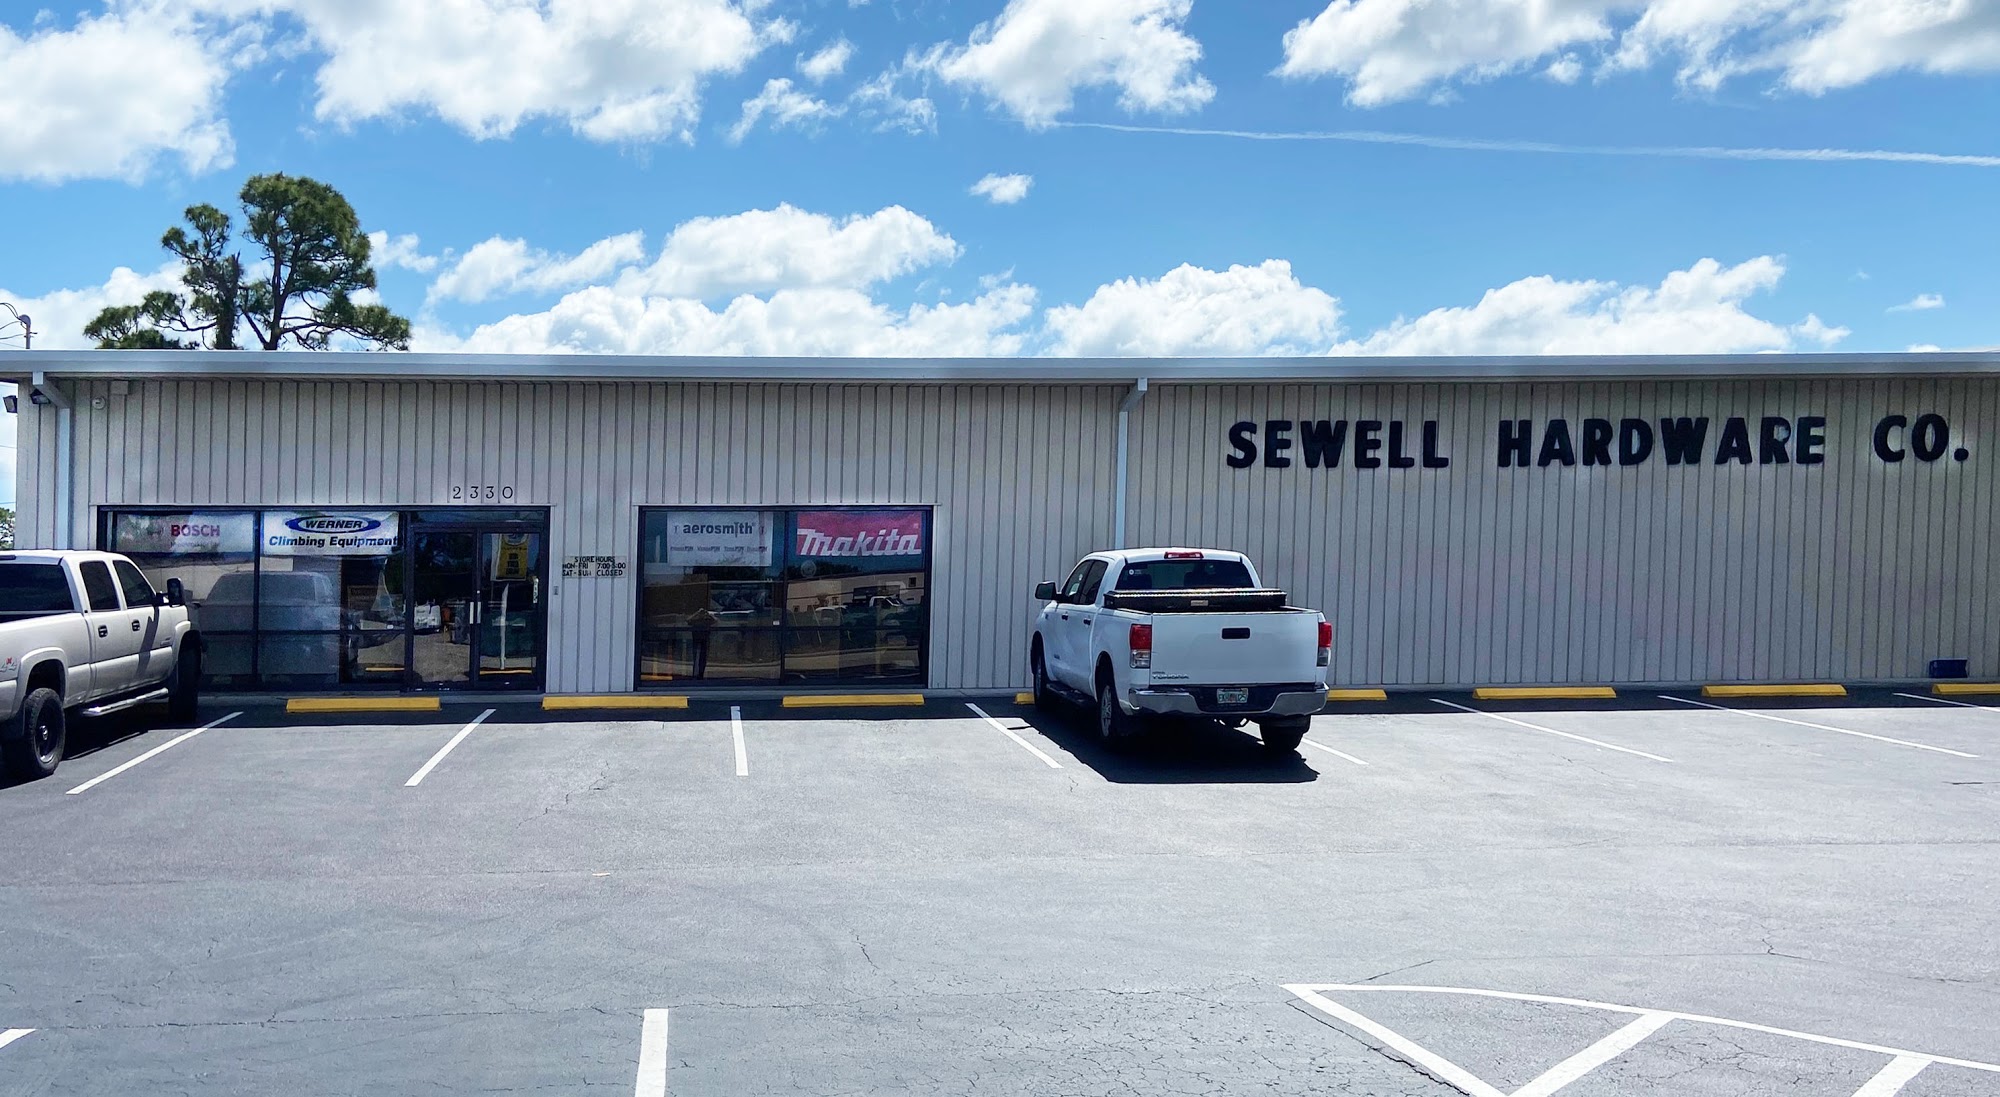 Sewell Hardware Co., Inc.